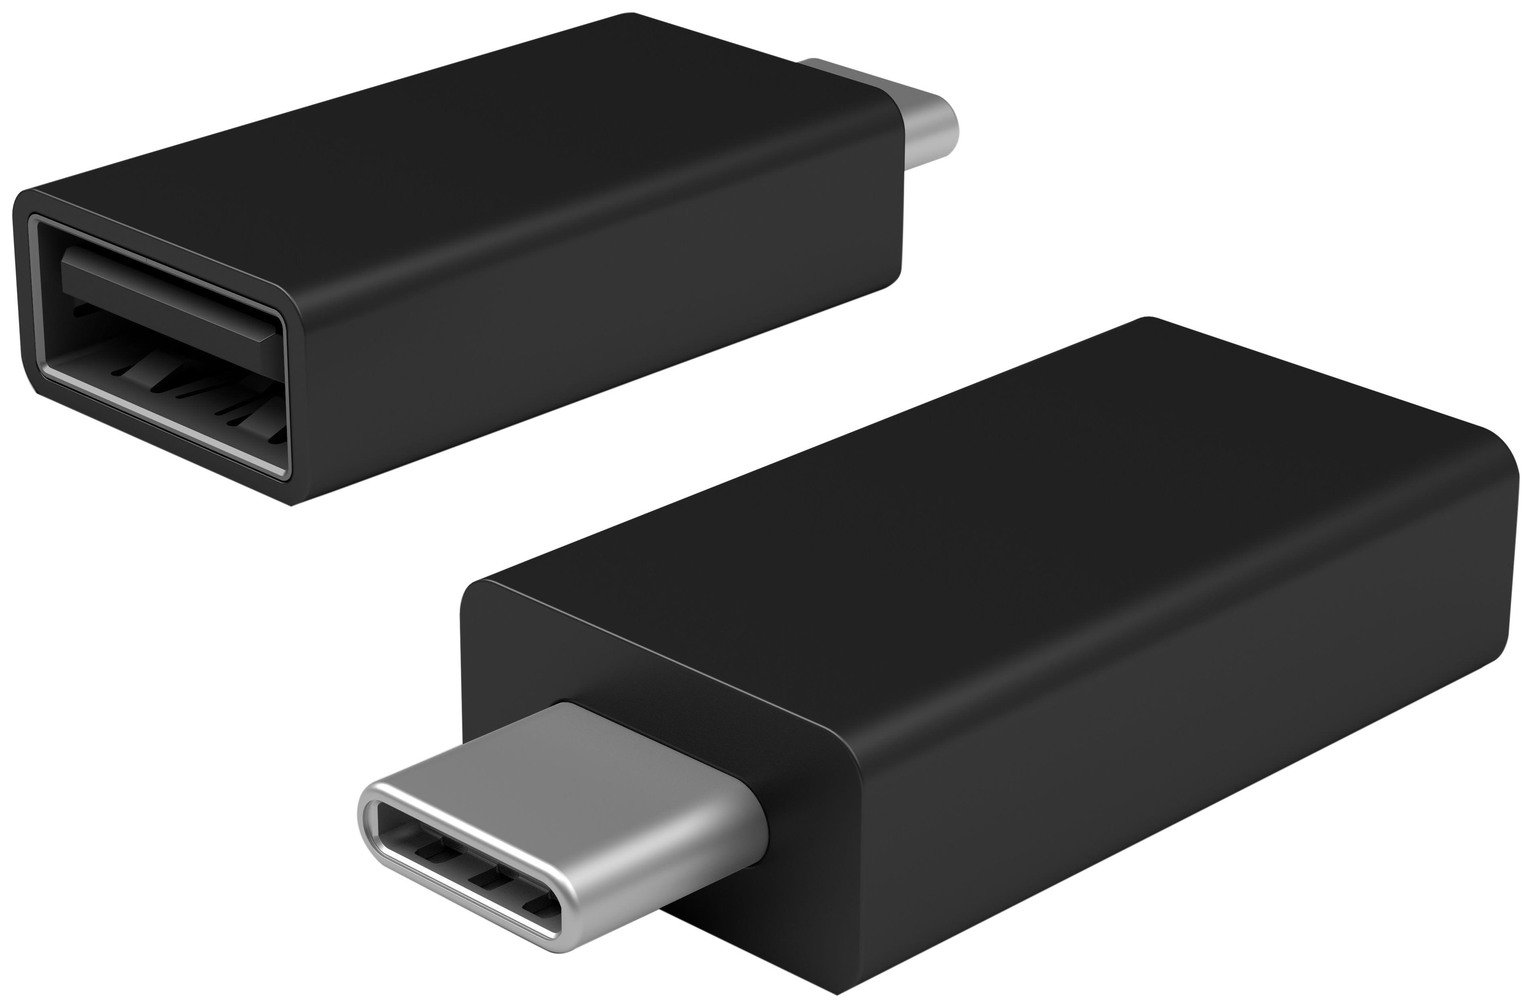 Microsoft Surface USB-C to USB 3.0 Adaptor Review